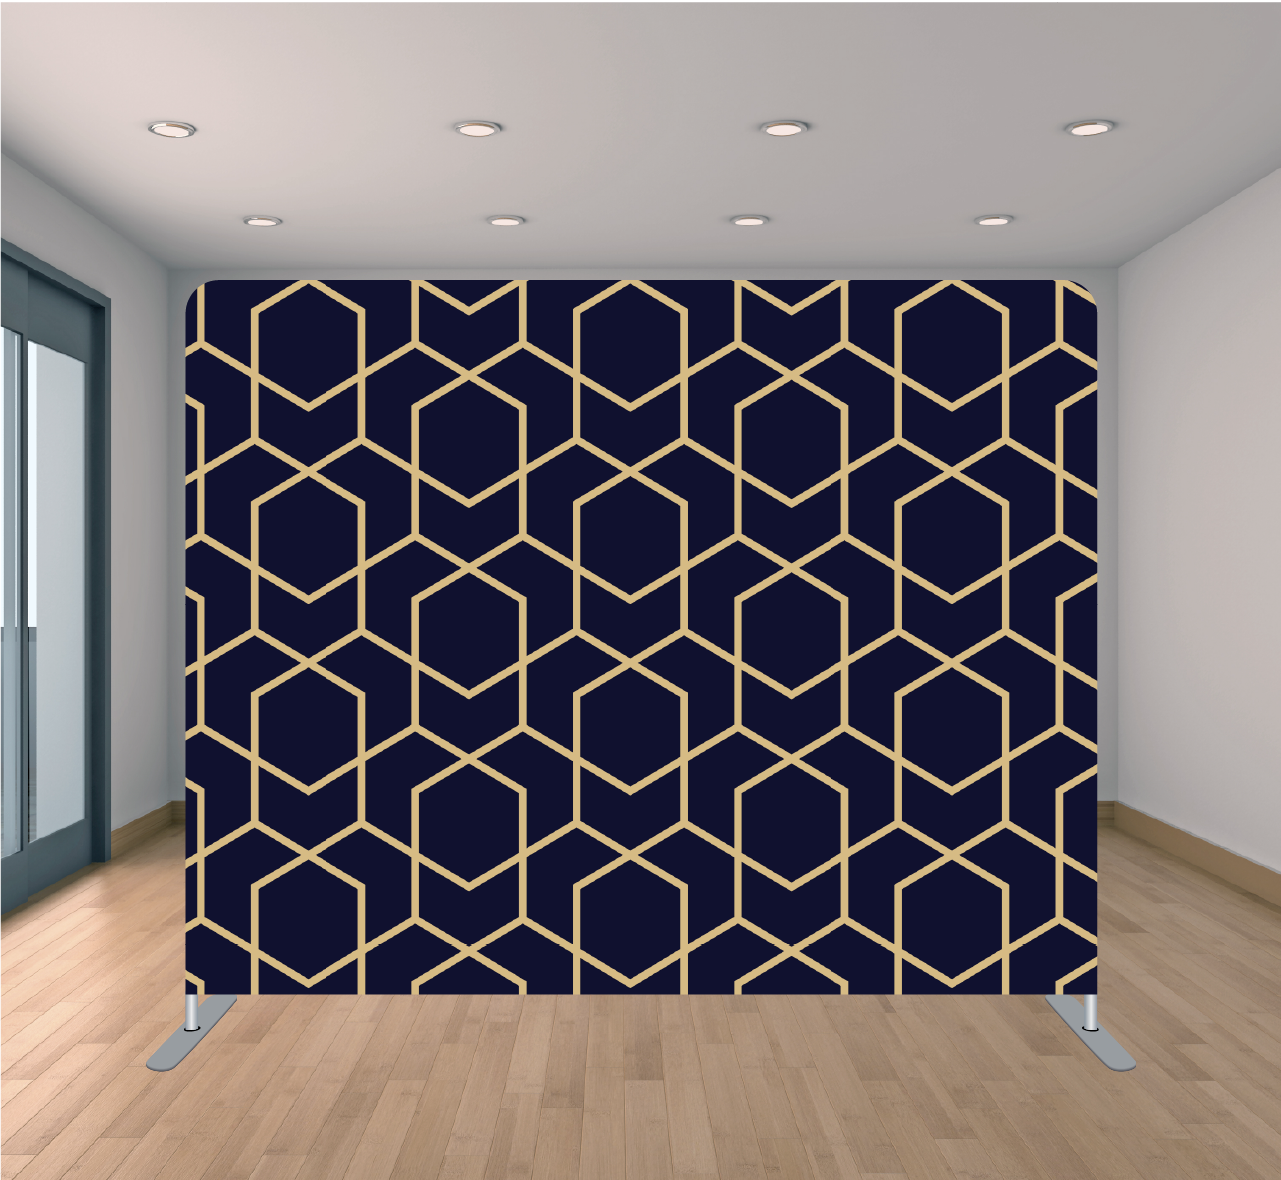 8X8 Pillowcase Tension Backdrop- Blue and Gold Geometric